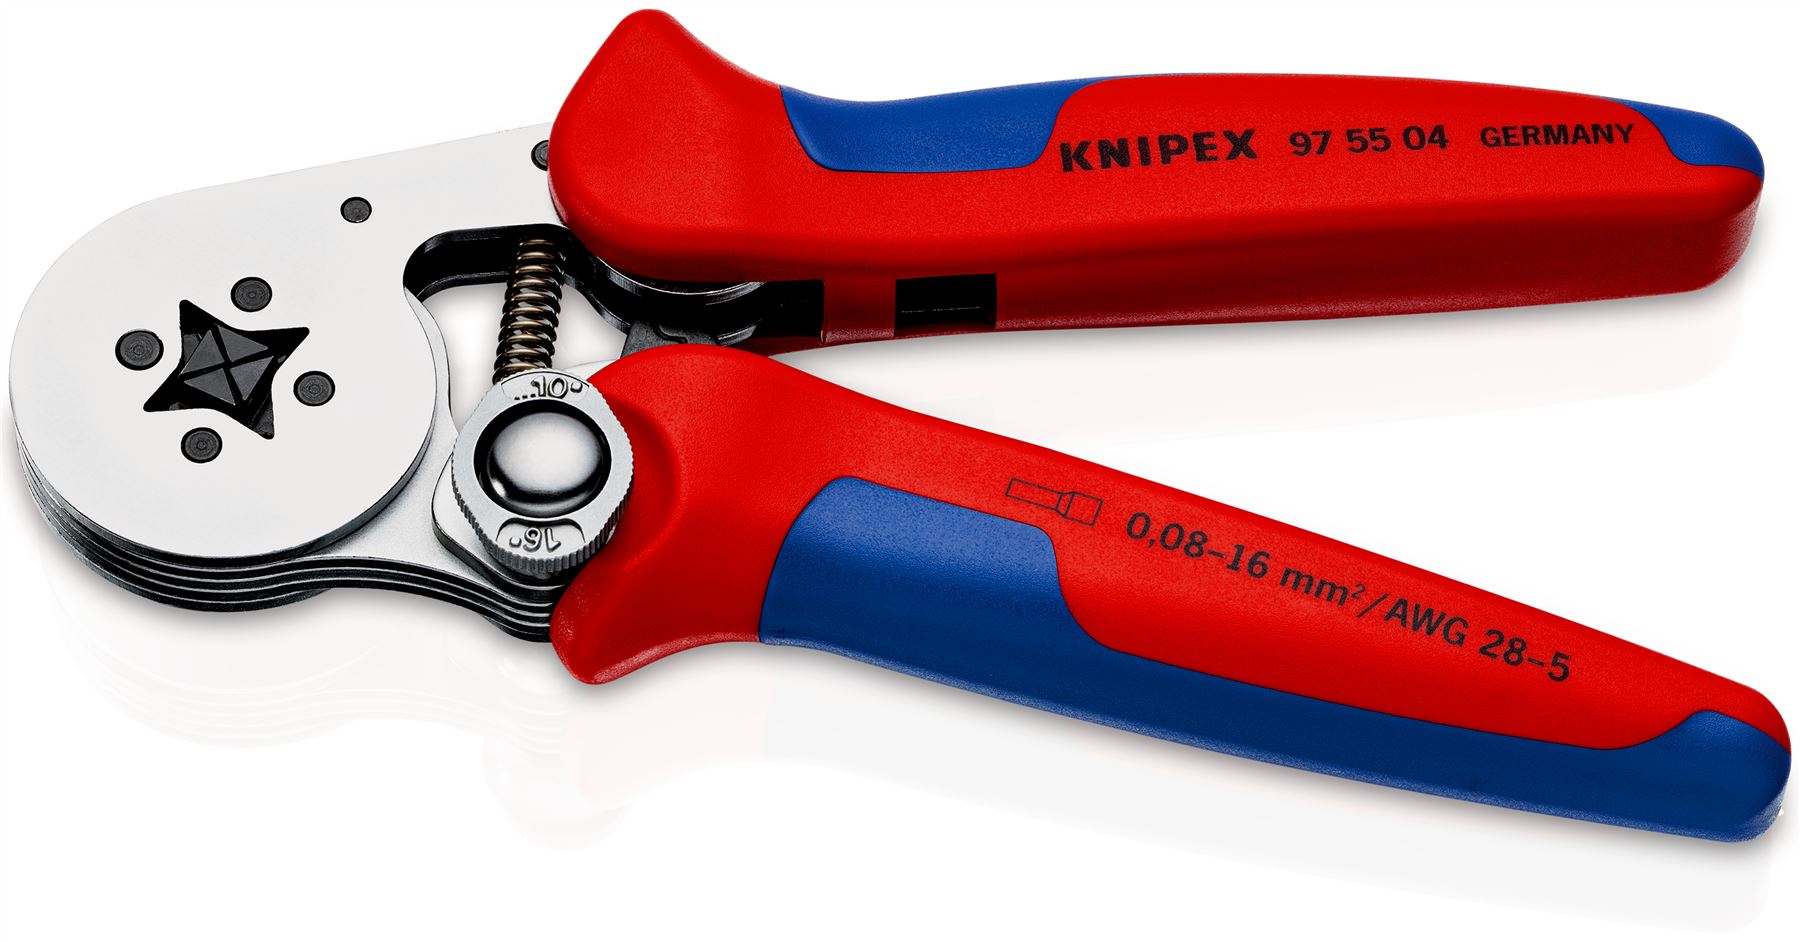 KNIPEX Self Adjusting Crimping Pliers for Wire Ferrules with Lateral Access 0.08-16mm² 180mm Multi Component Grips 97 55 04 SB